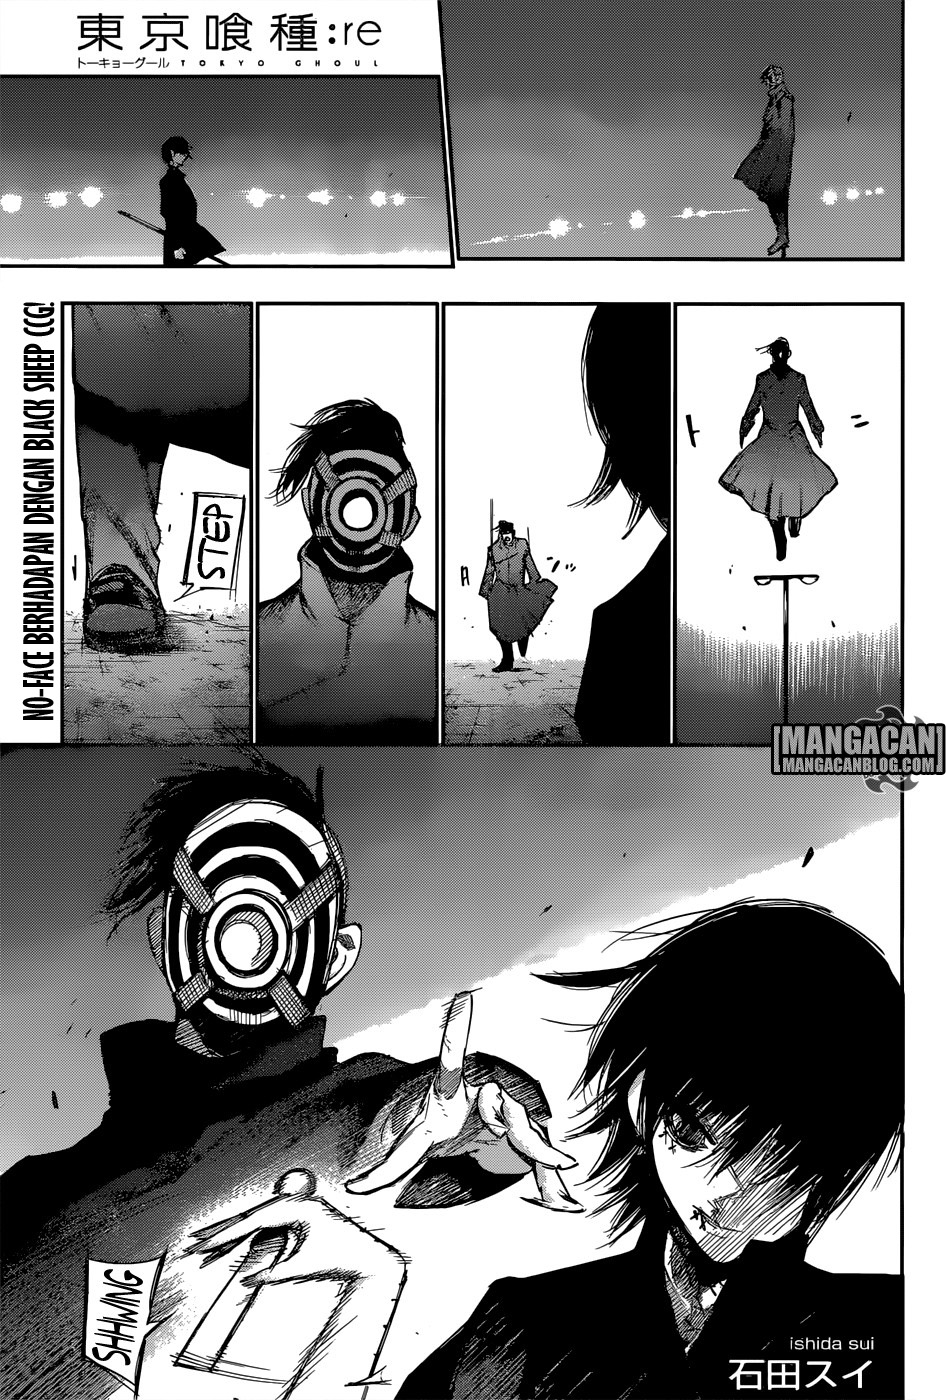 Tokyo Ghoul: re: Chapter 110 - Page 1